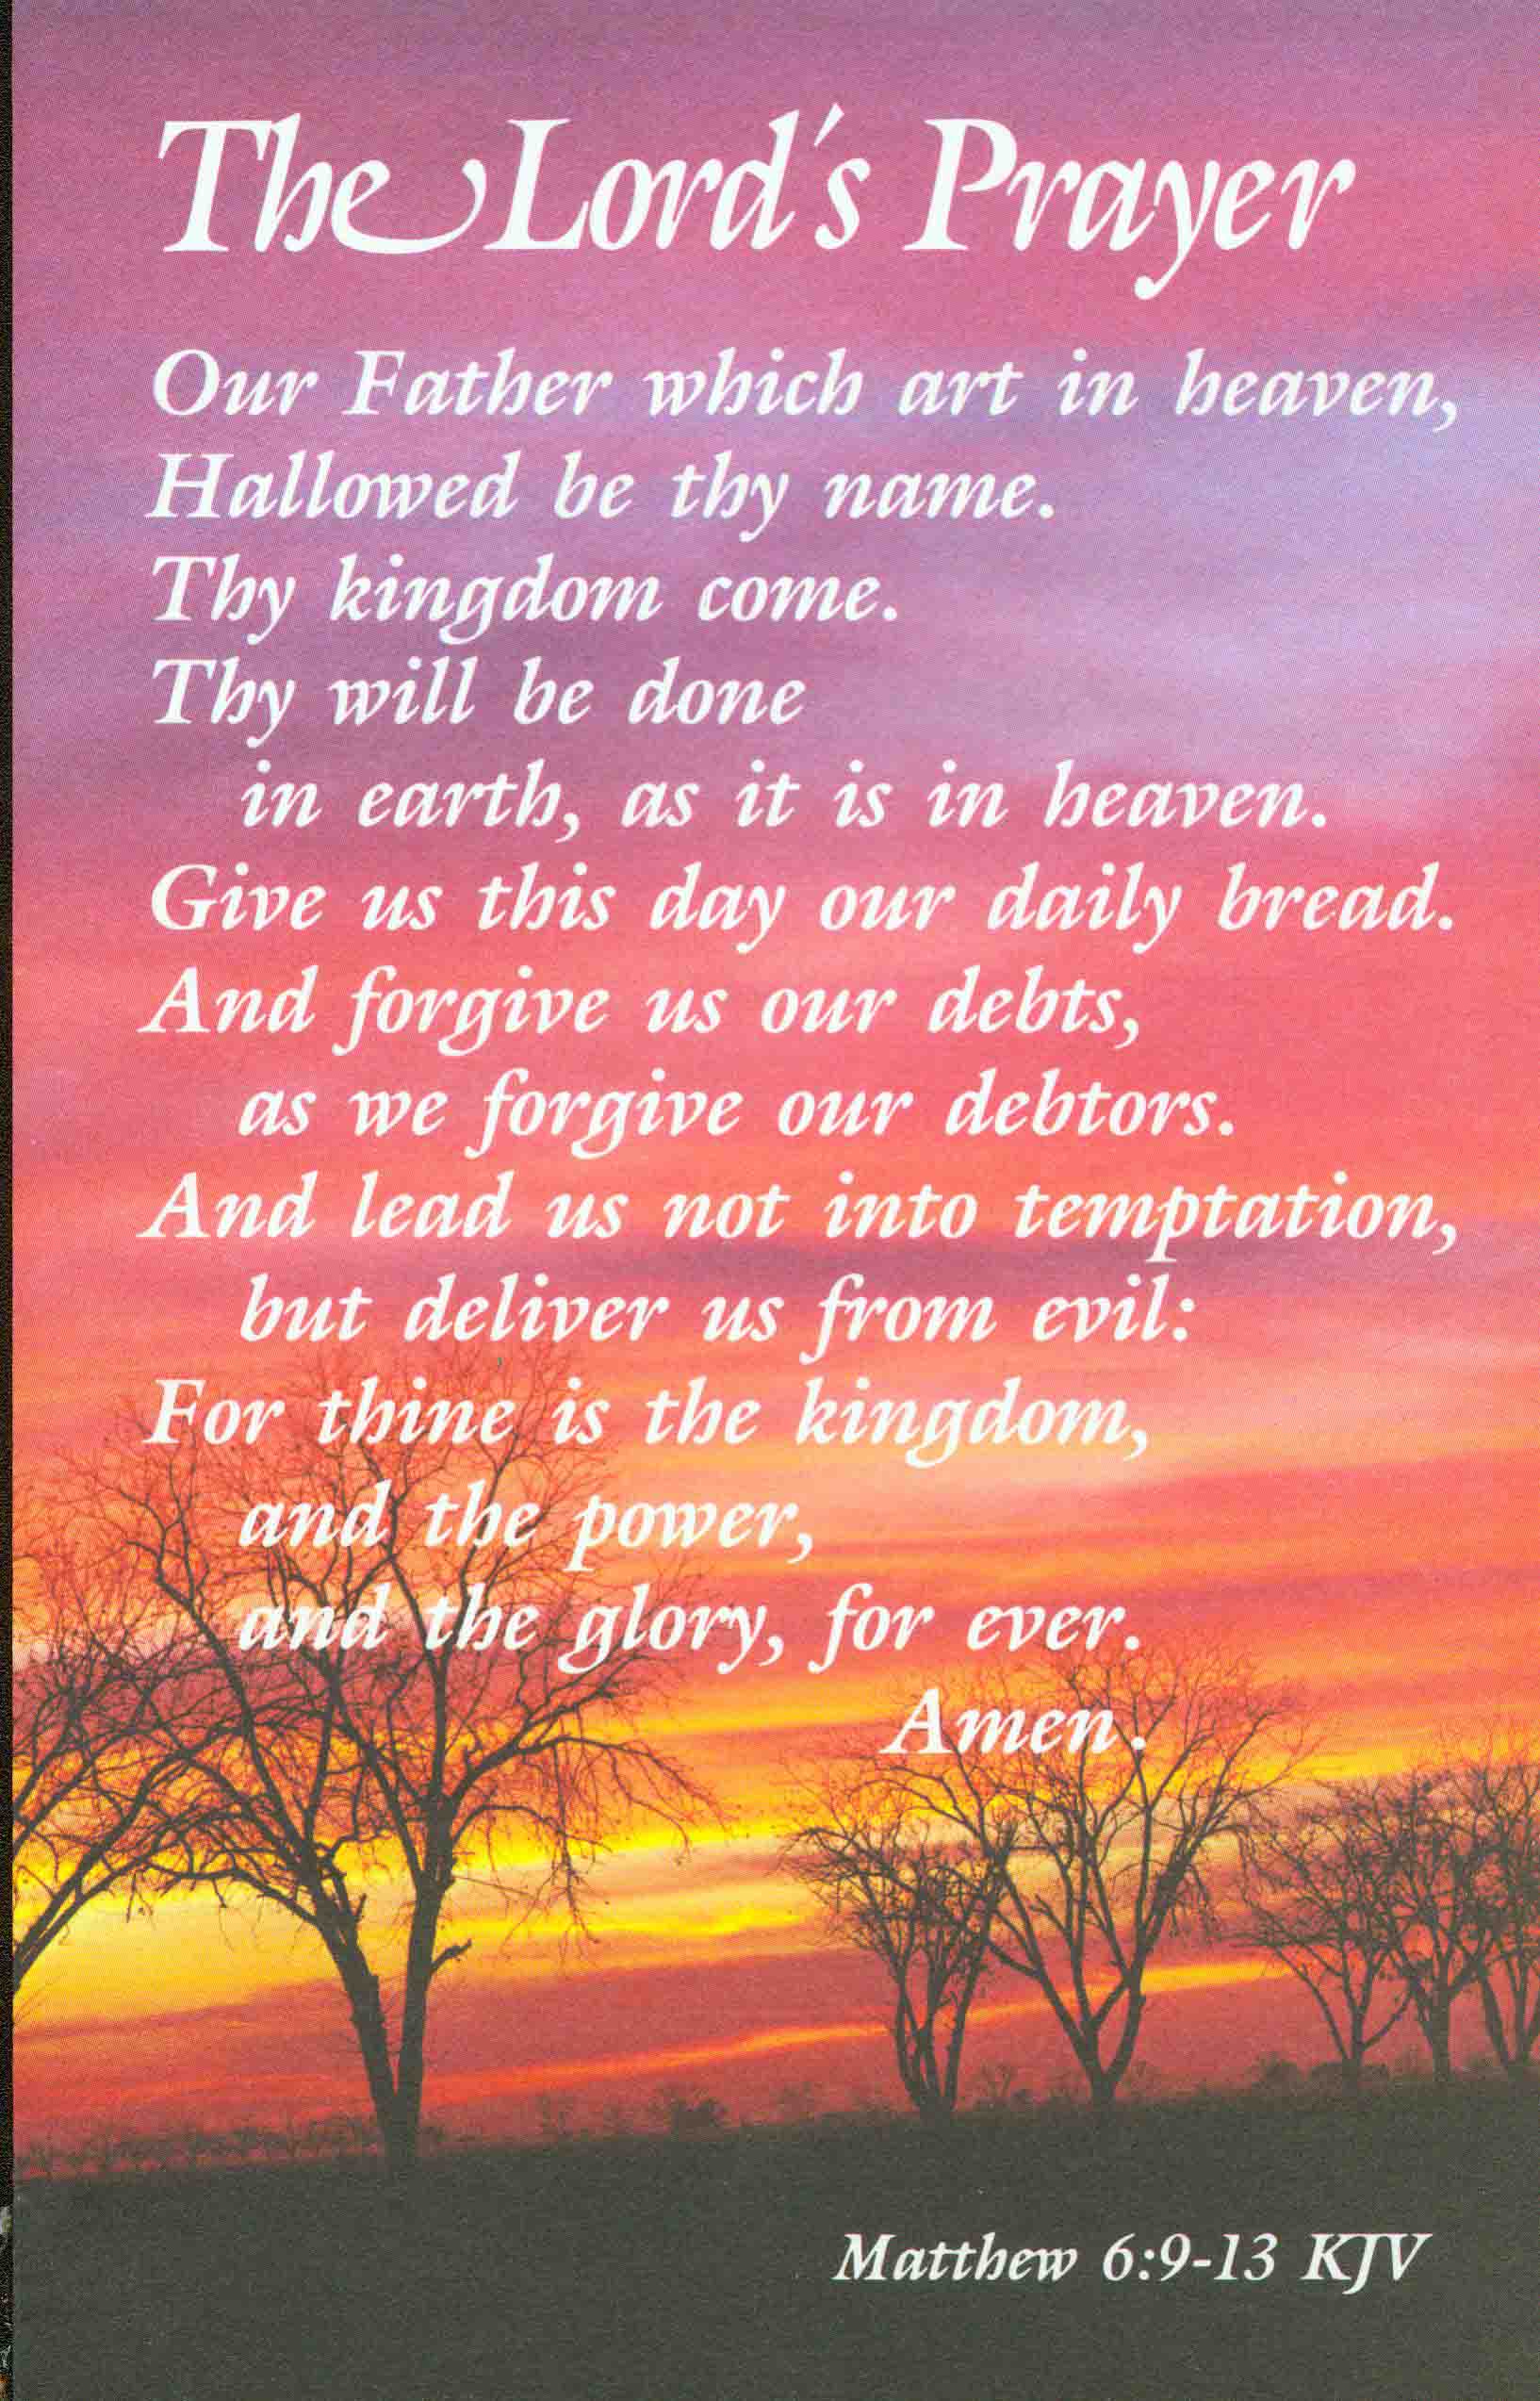 the lord's prayer wallpaper,nature,natural landscape,text,sky,morning